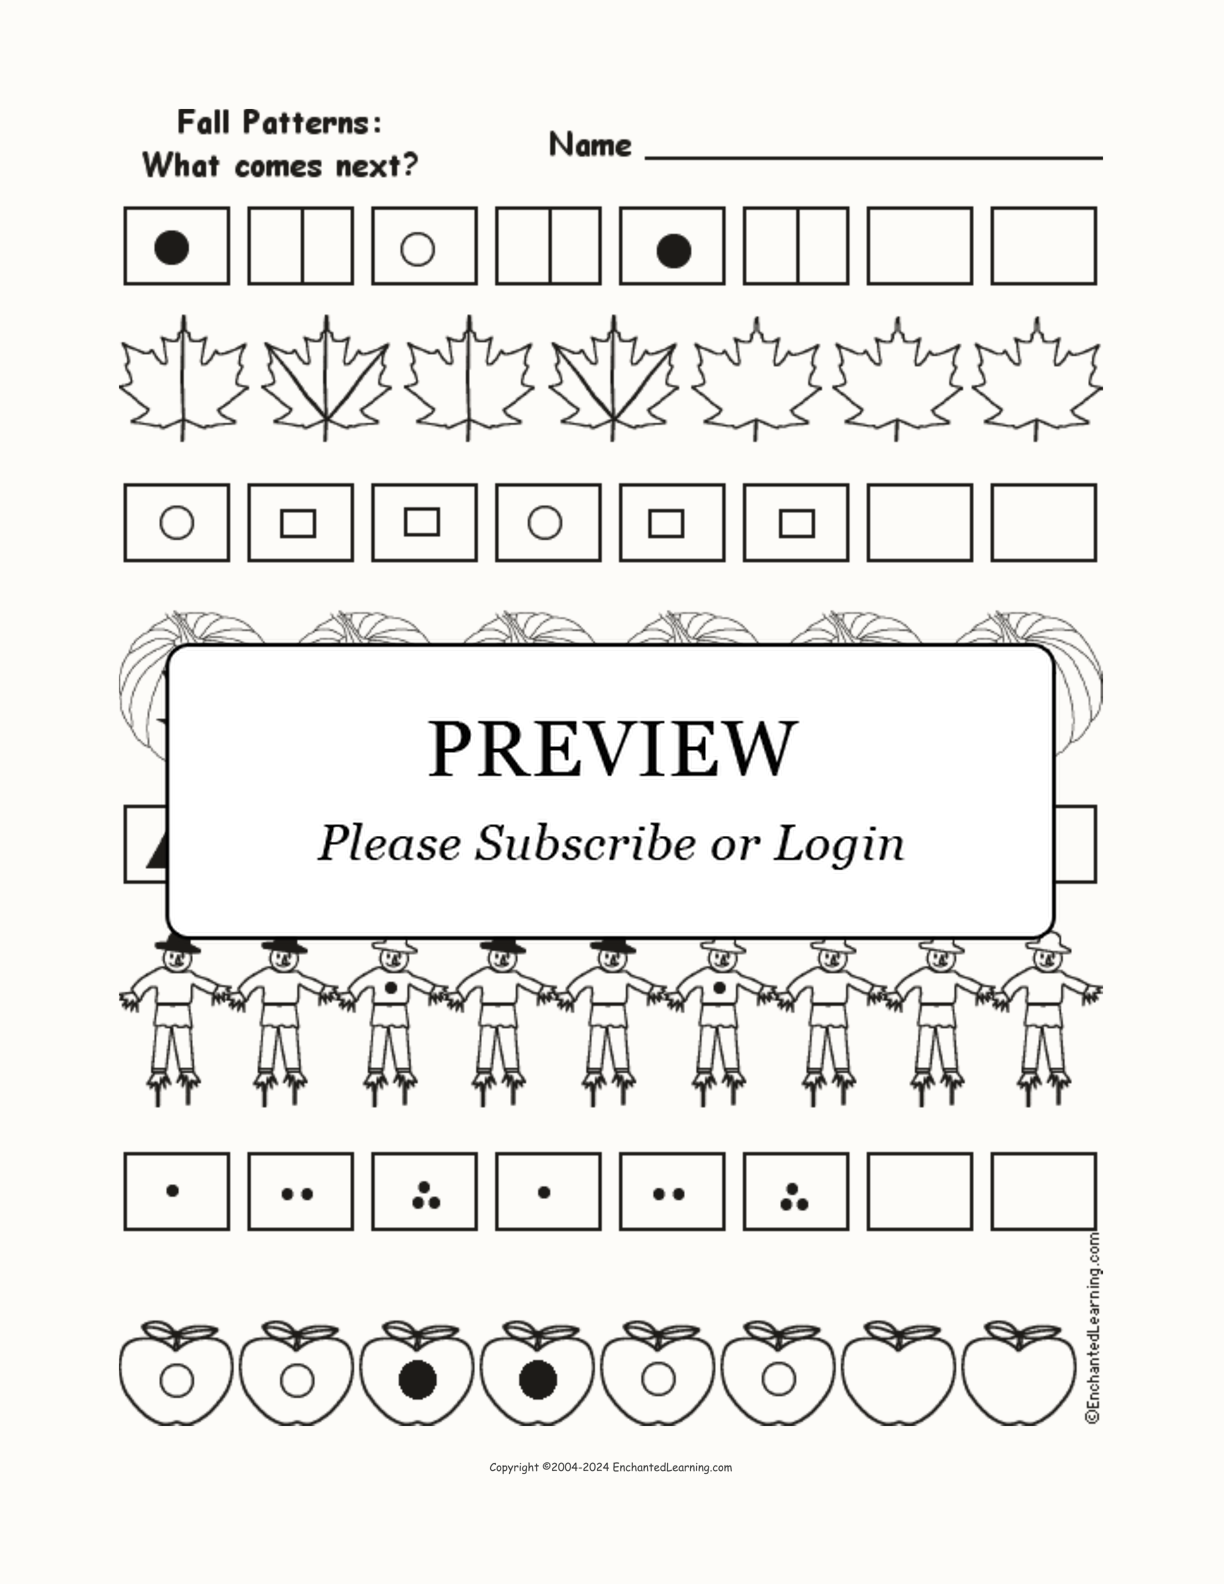 What Comes Next In The Fall Patterns? interactive worksheet page 1